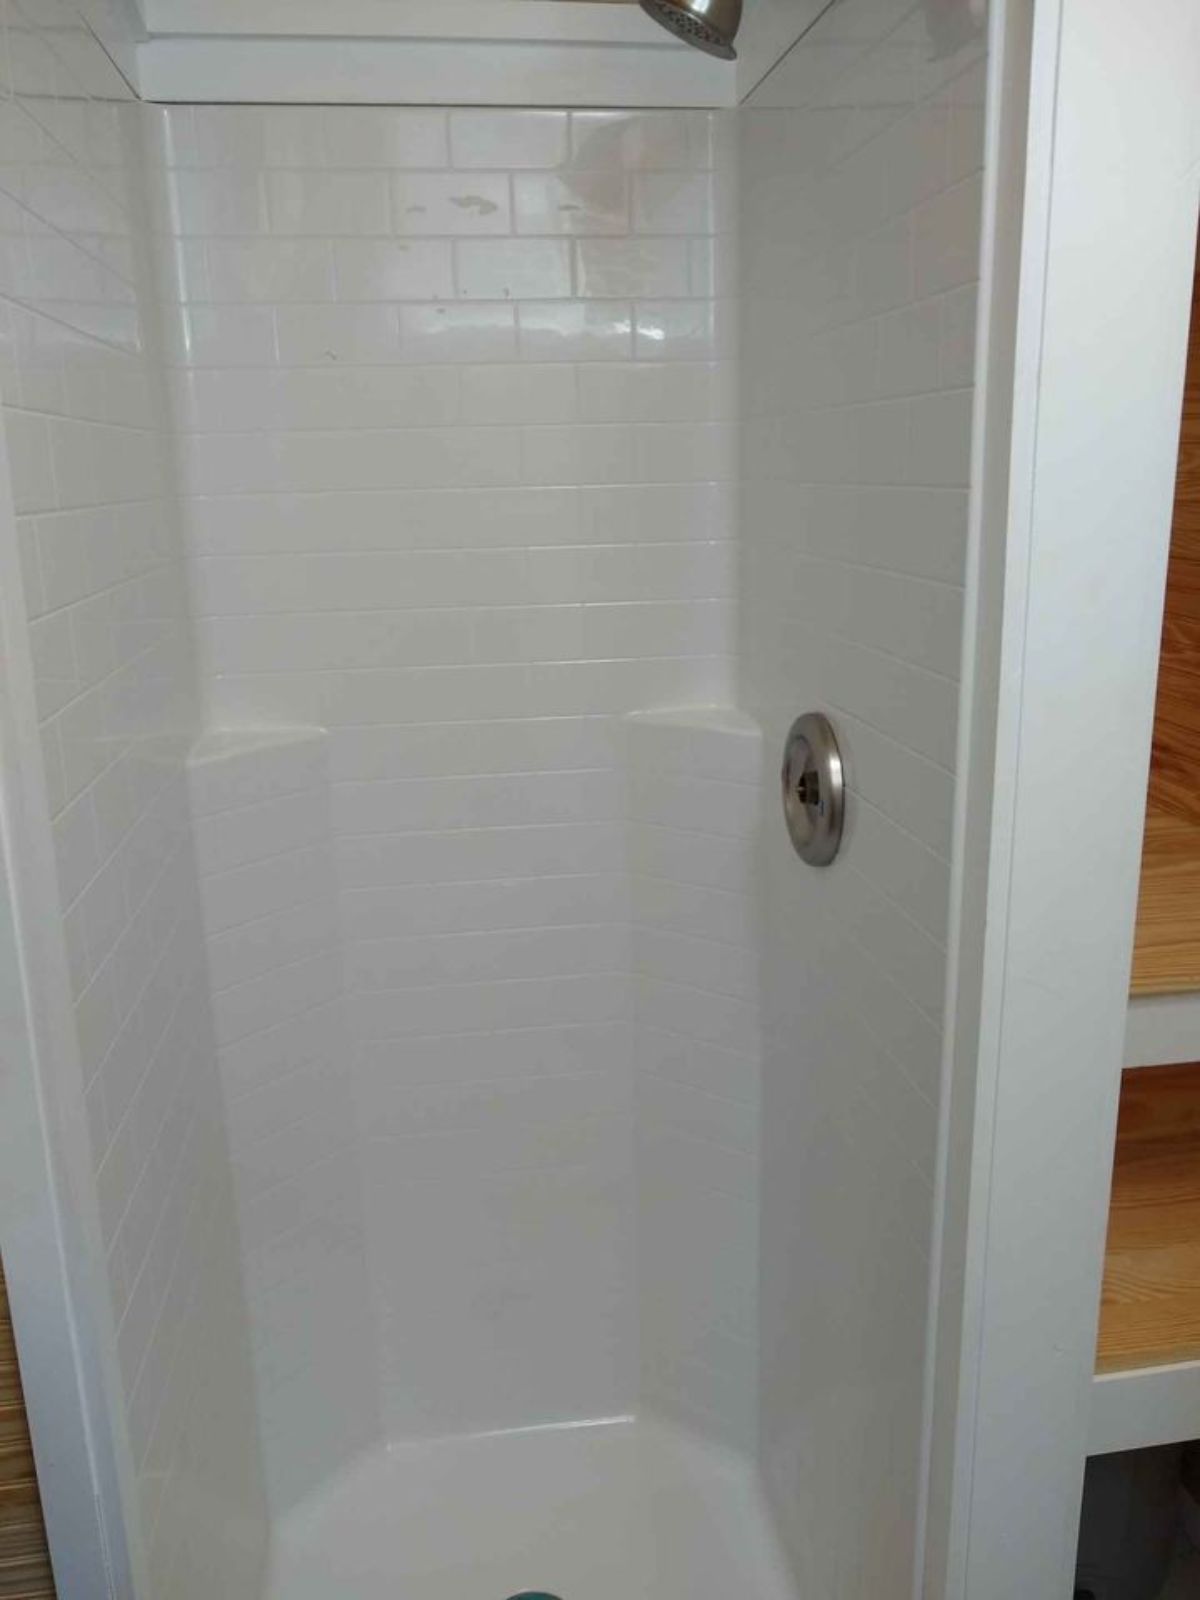 Separate fiberglass shower stall installed in bathroom area of 24’ One Bedroom Tiny House